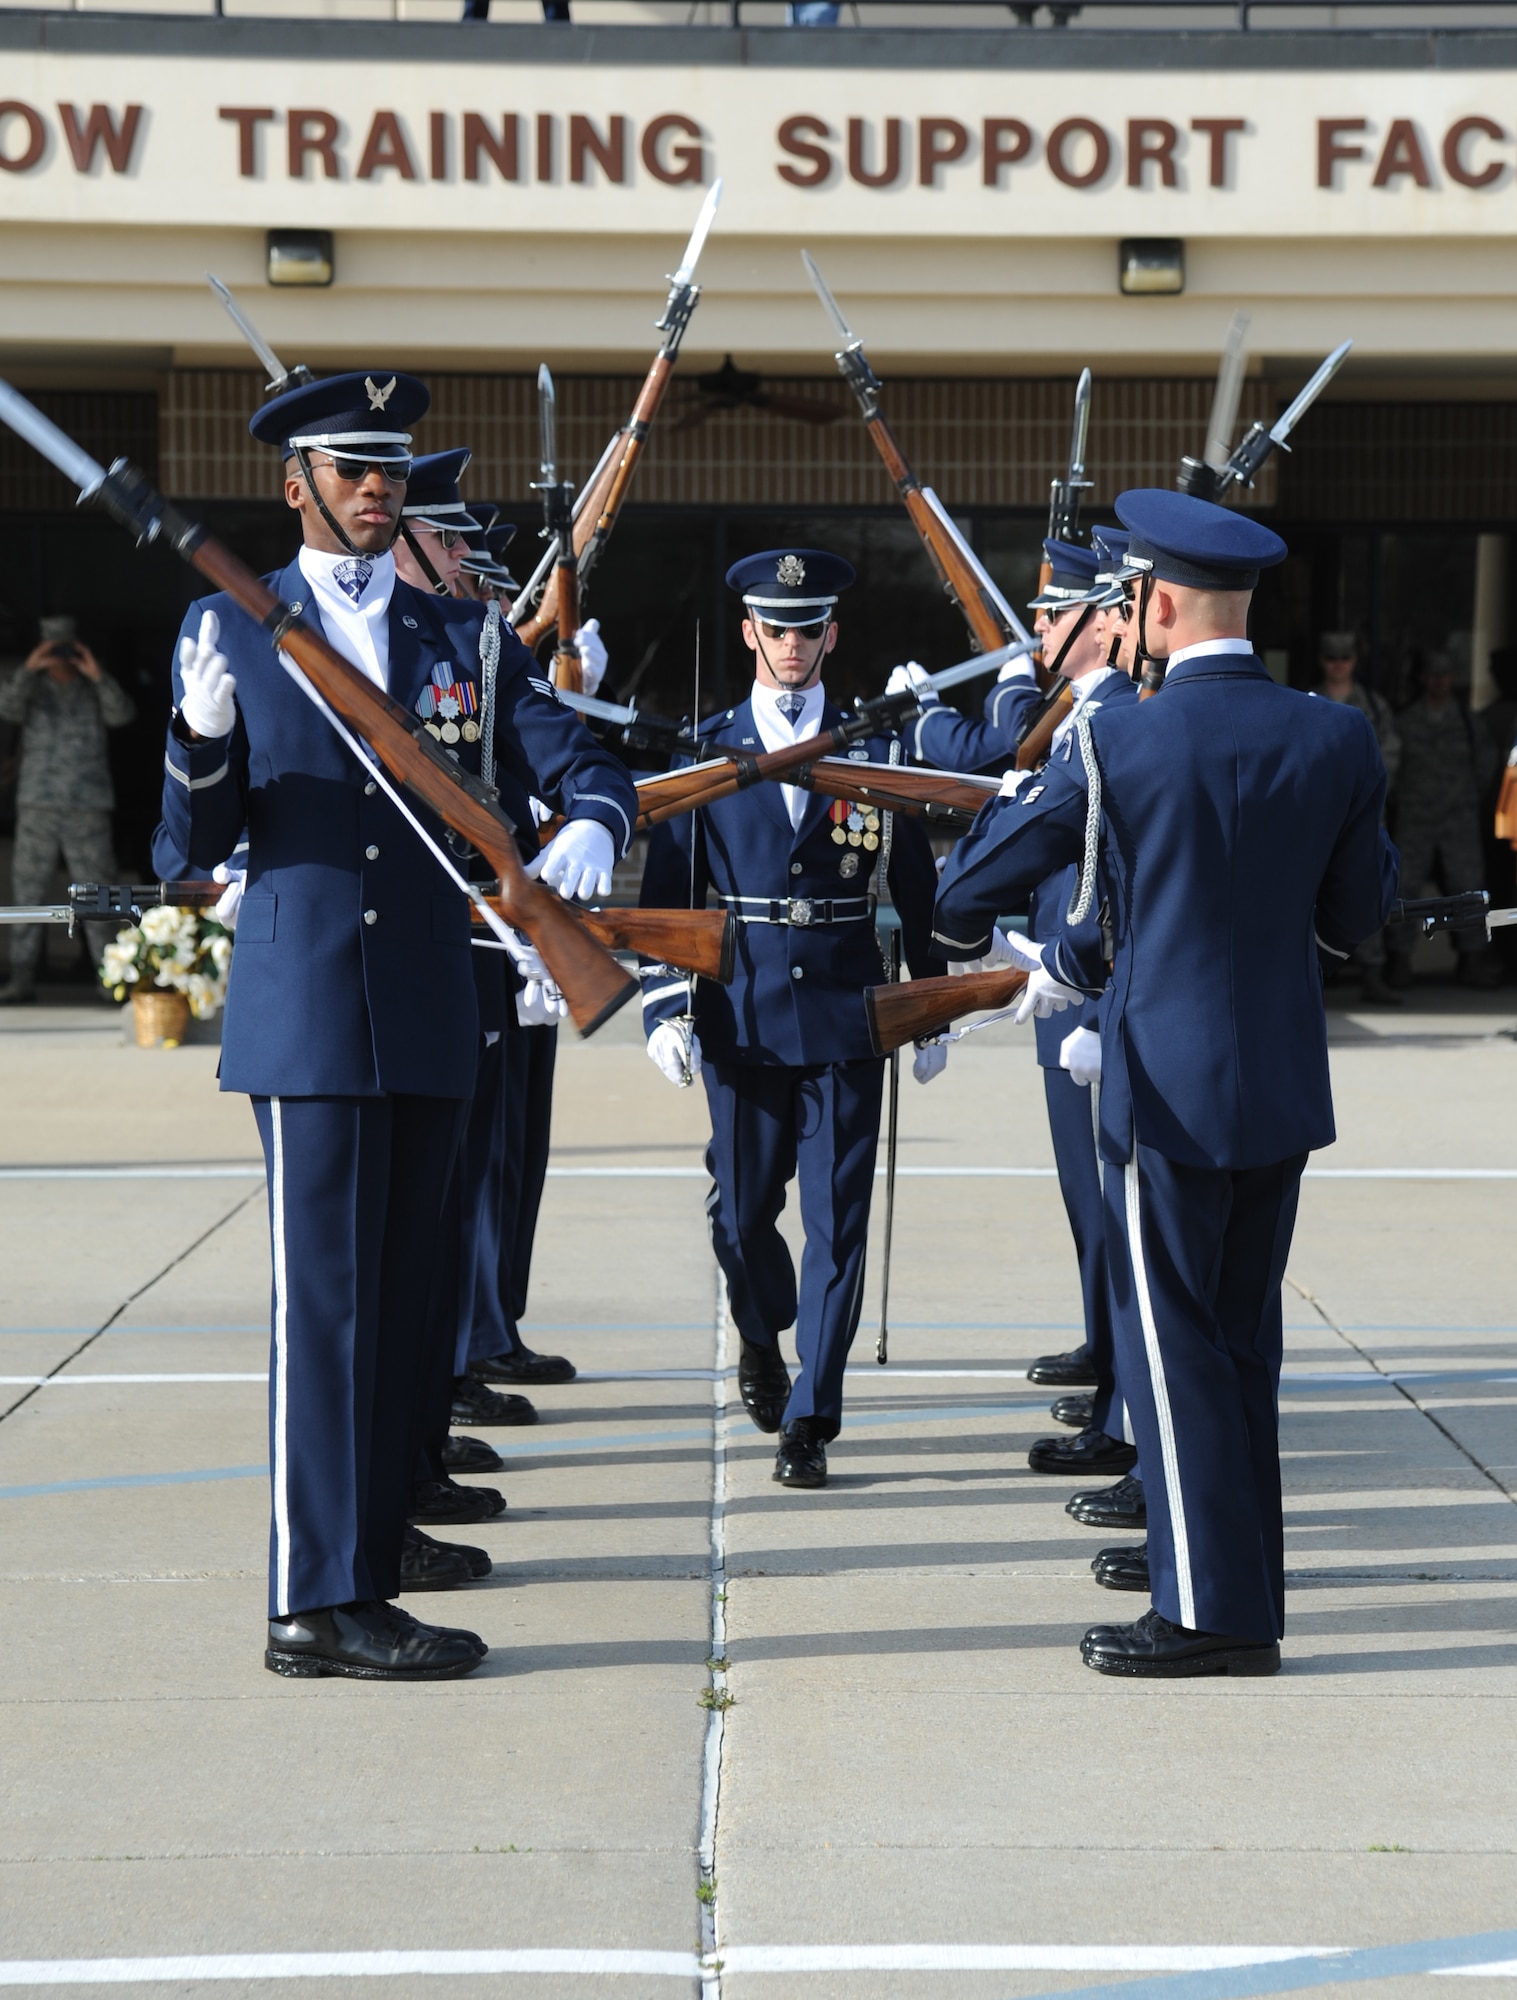 First Lt. Alan Morford, U.S. Air Force Honor Guard Drill Team flight commander, walks through two lines of drill team members as they spin their rifles during a performance on the drill pad behind the Levitow Training Support Facility March 7, 2014, at Keesler Air Force Base, Miss.  The routine was developed here during the past month and will be used for the next year. (U.S. Air Force photo by Kemberly Groue)